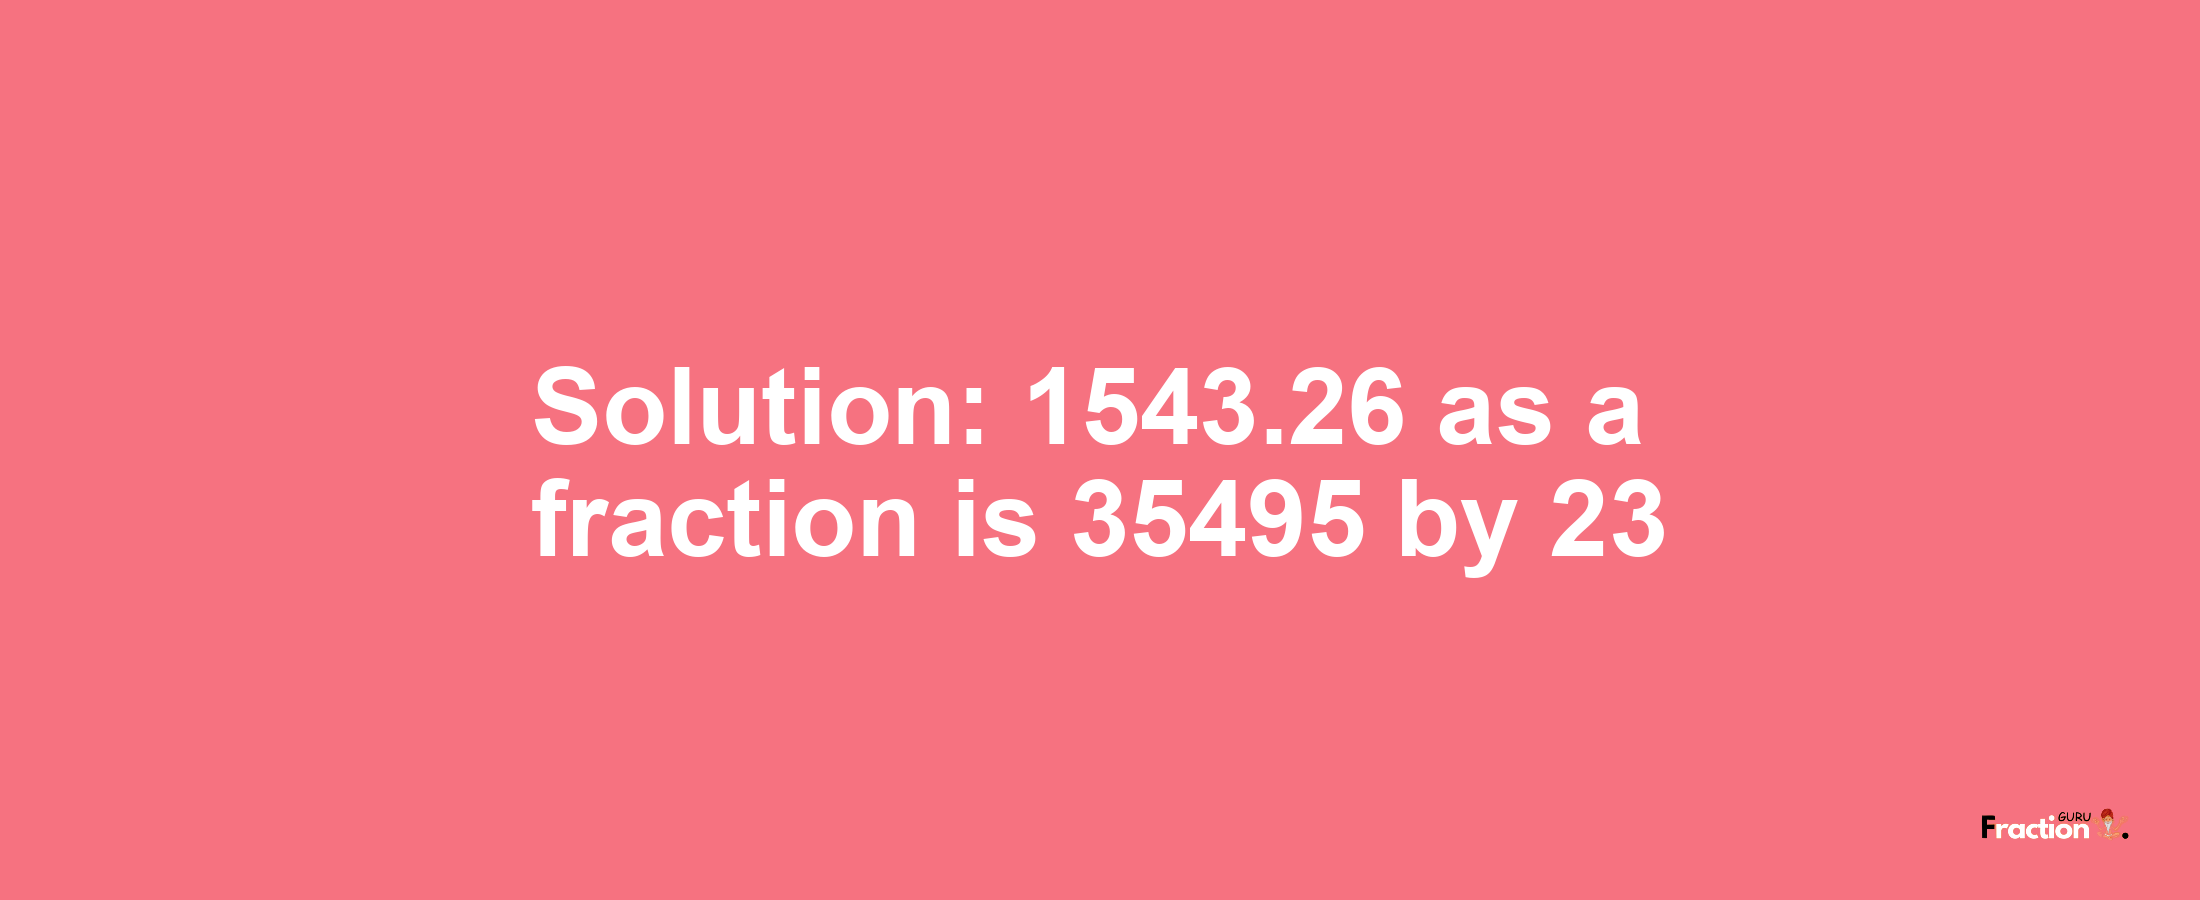 Solution:1543.26 as a fraction is 35495/23